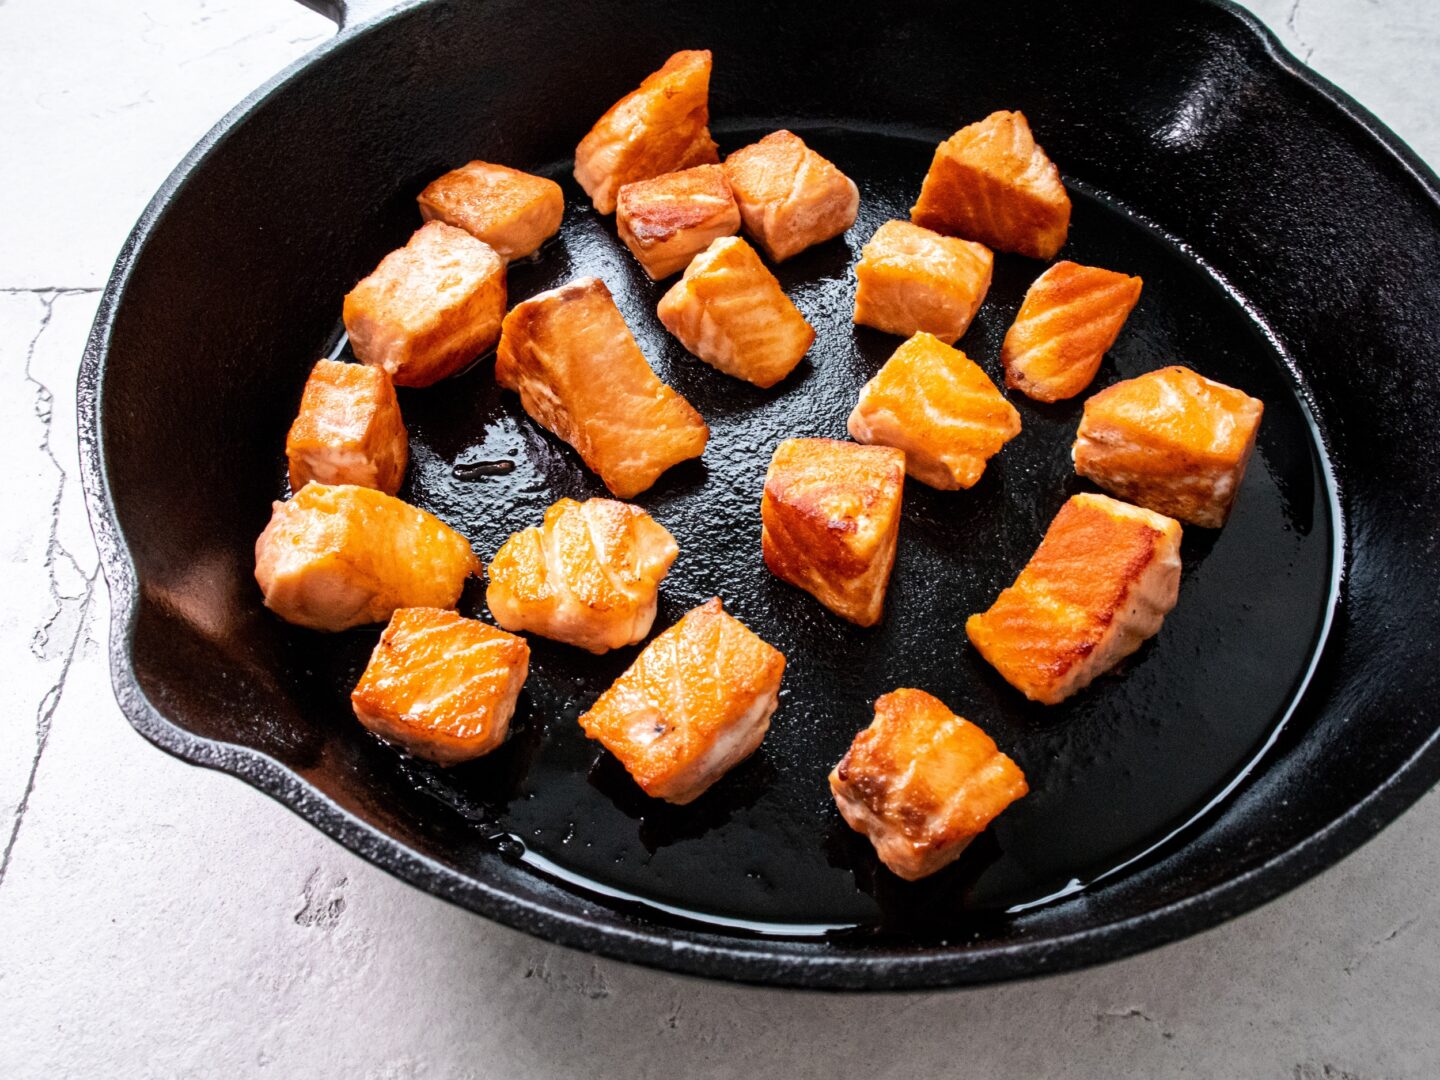 Seared salmon in a cast-iron skillet